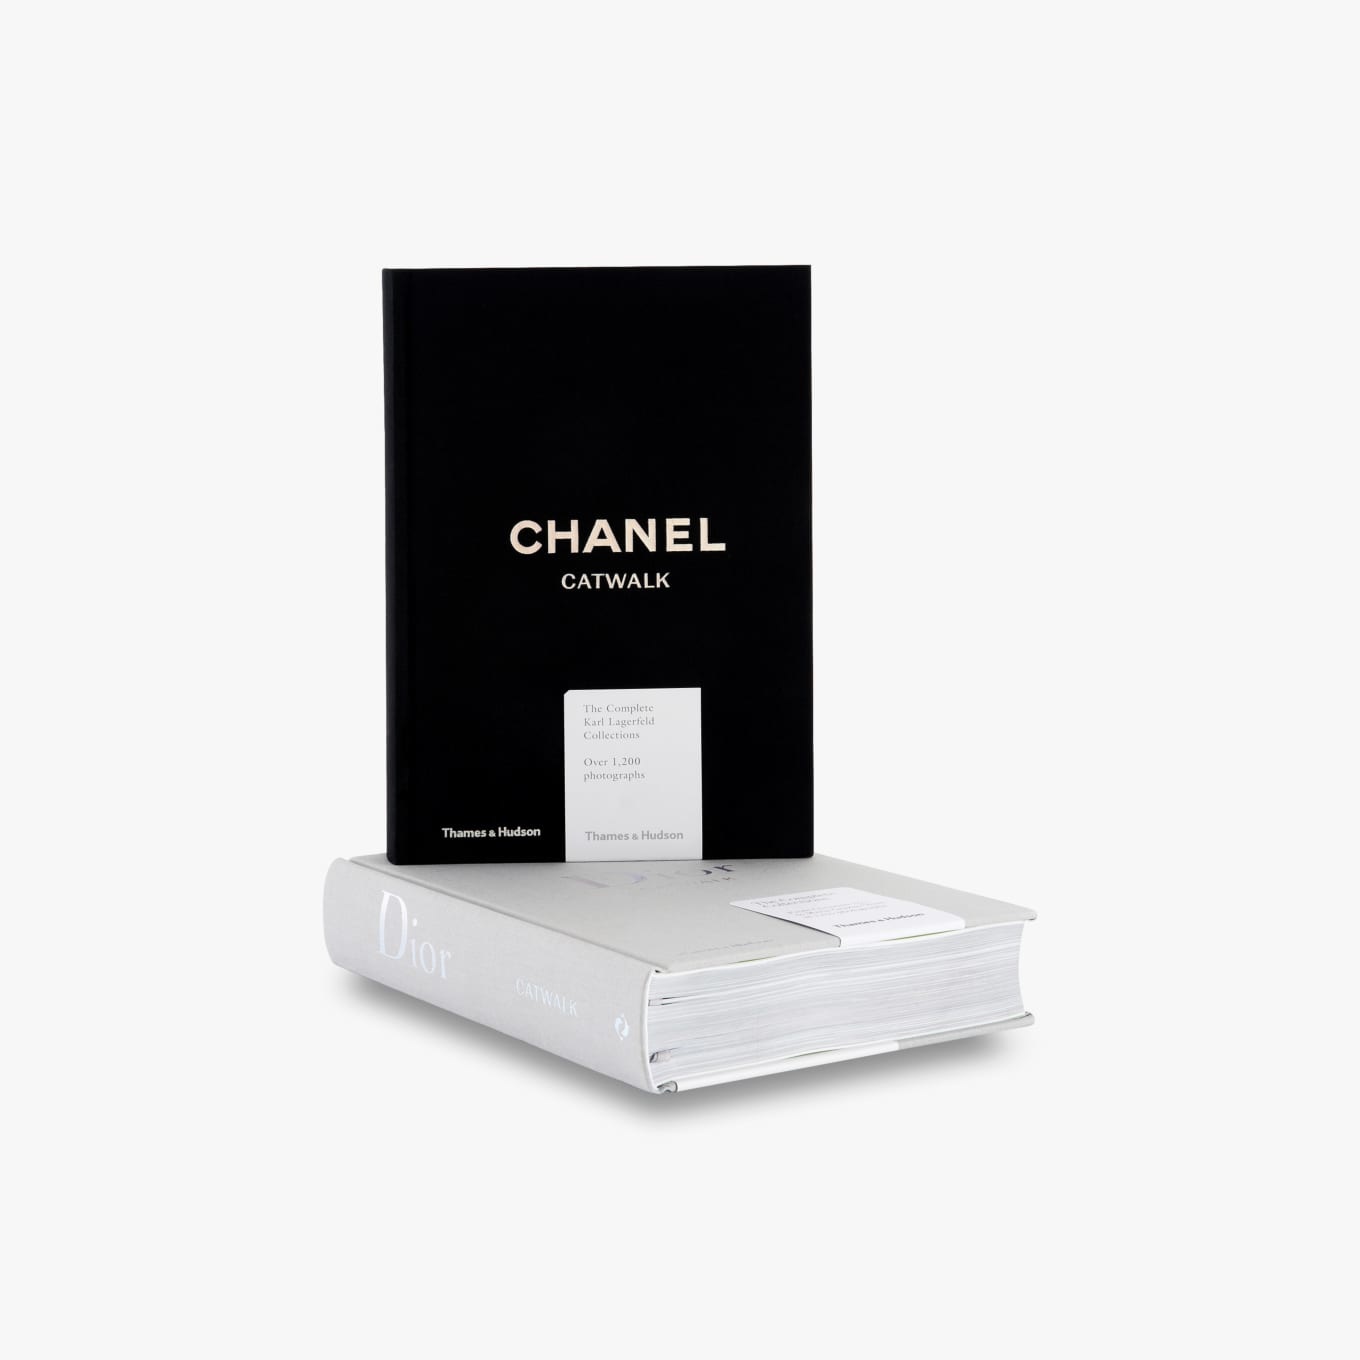 CHANEL, Catwalk Deluxe Edition - Book Unwrapping 